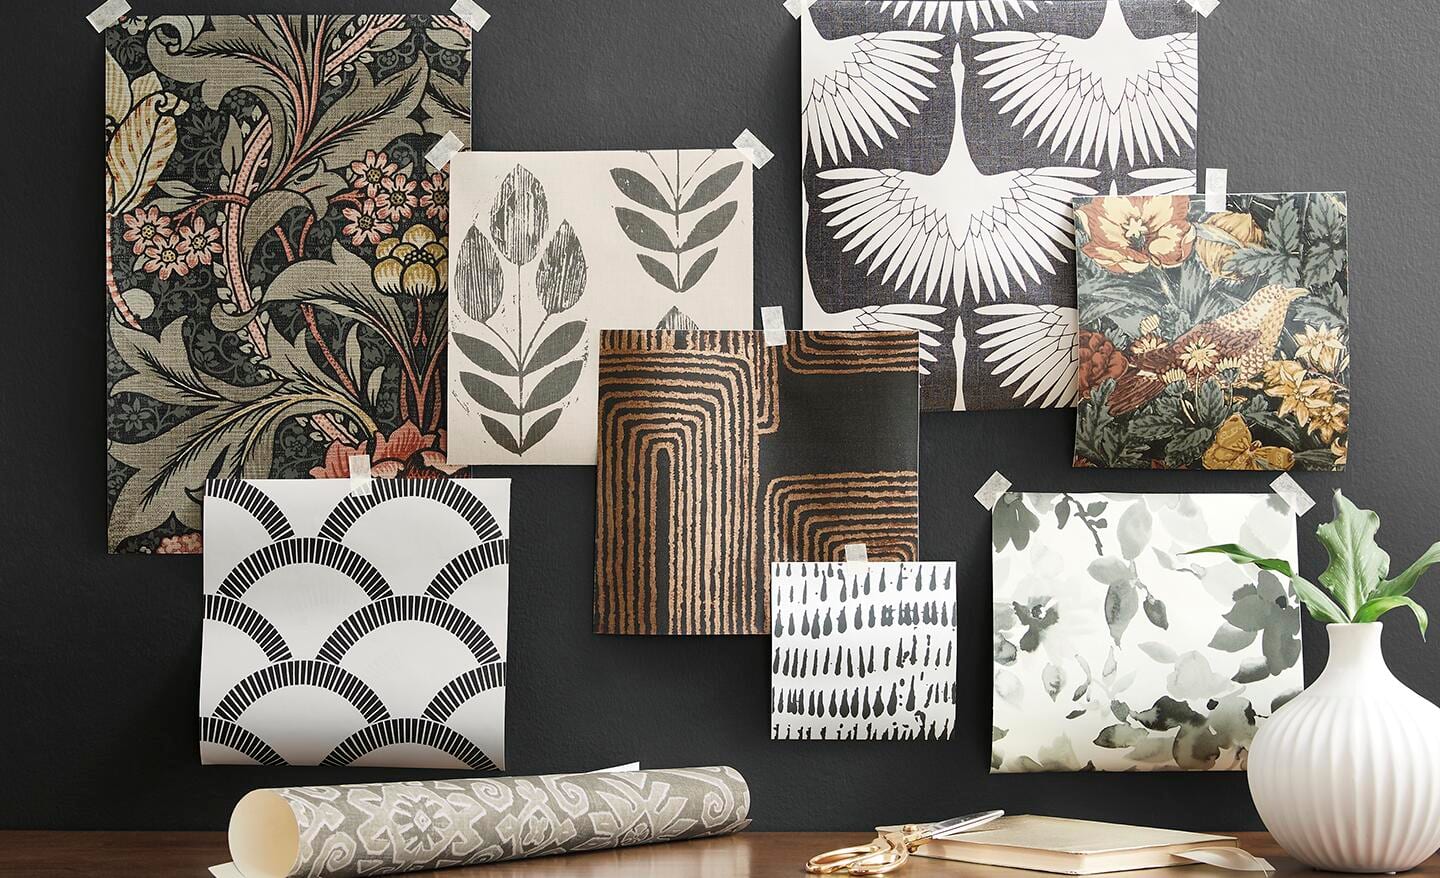 Several peel and stick wallpaper patterns displayed on a wall.